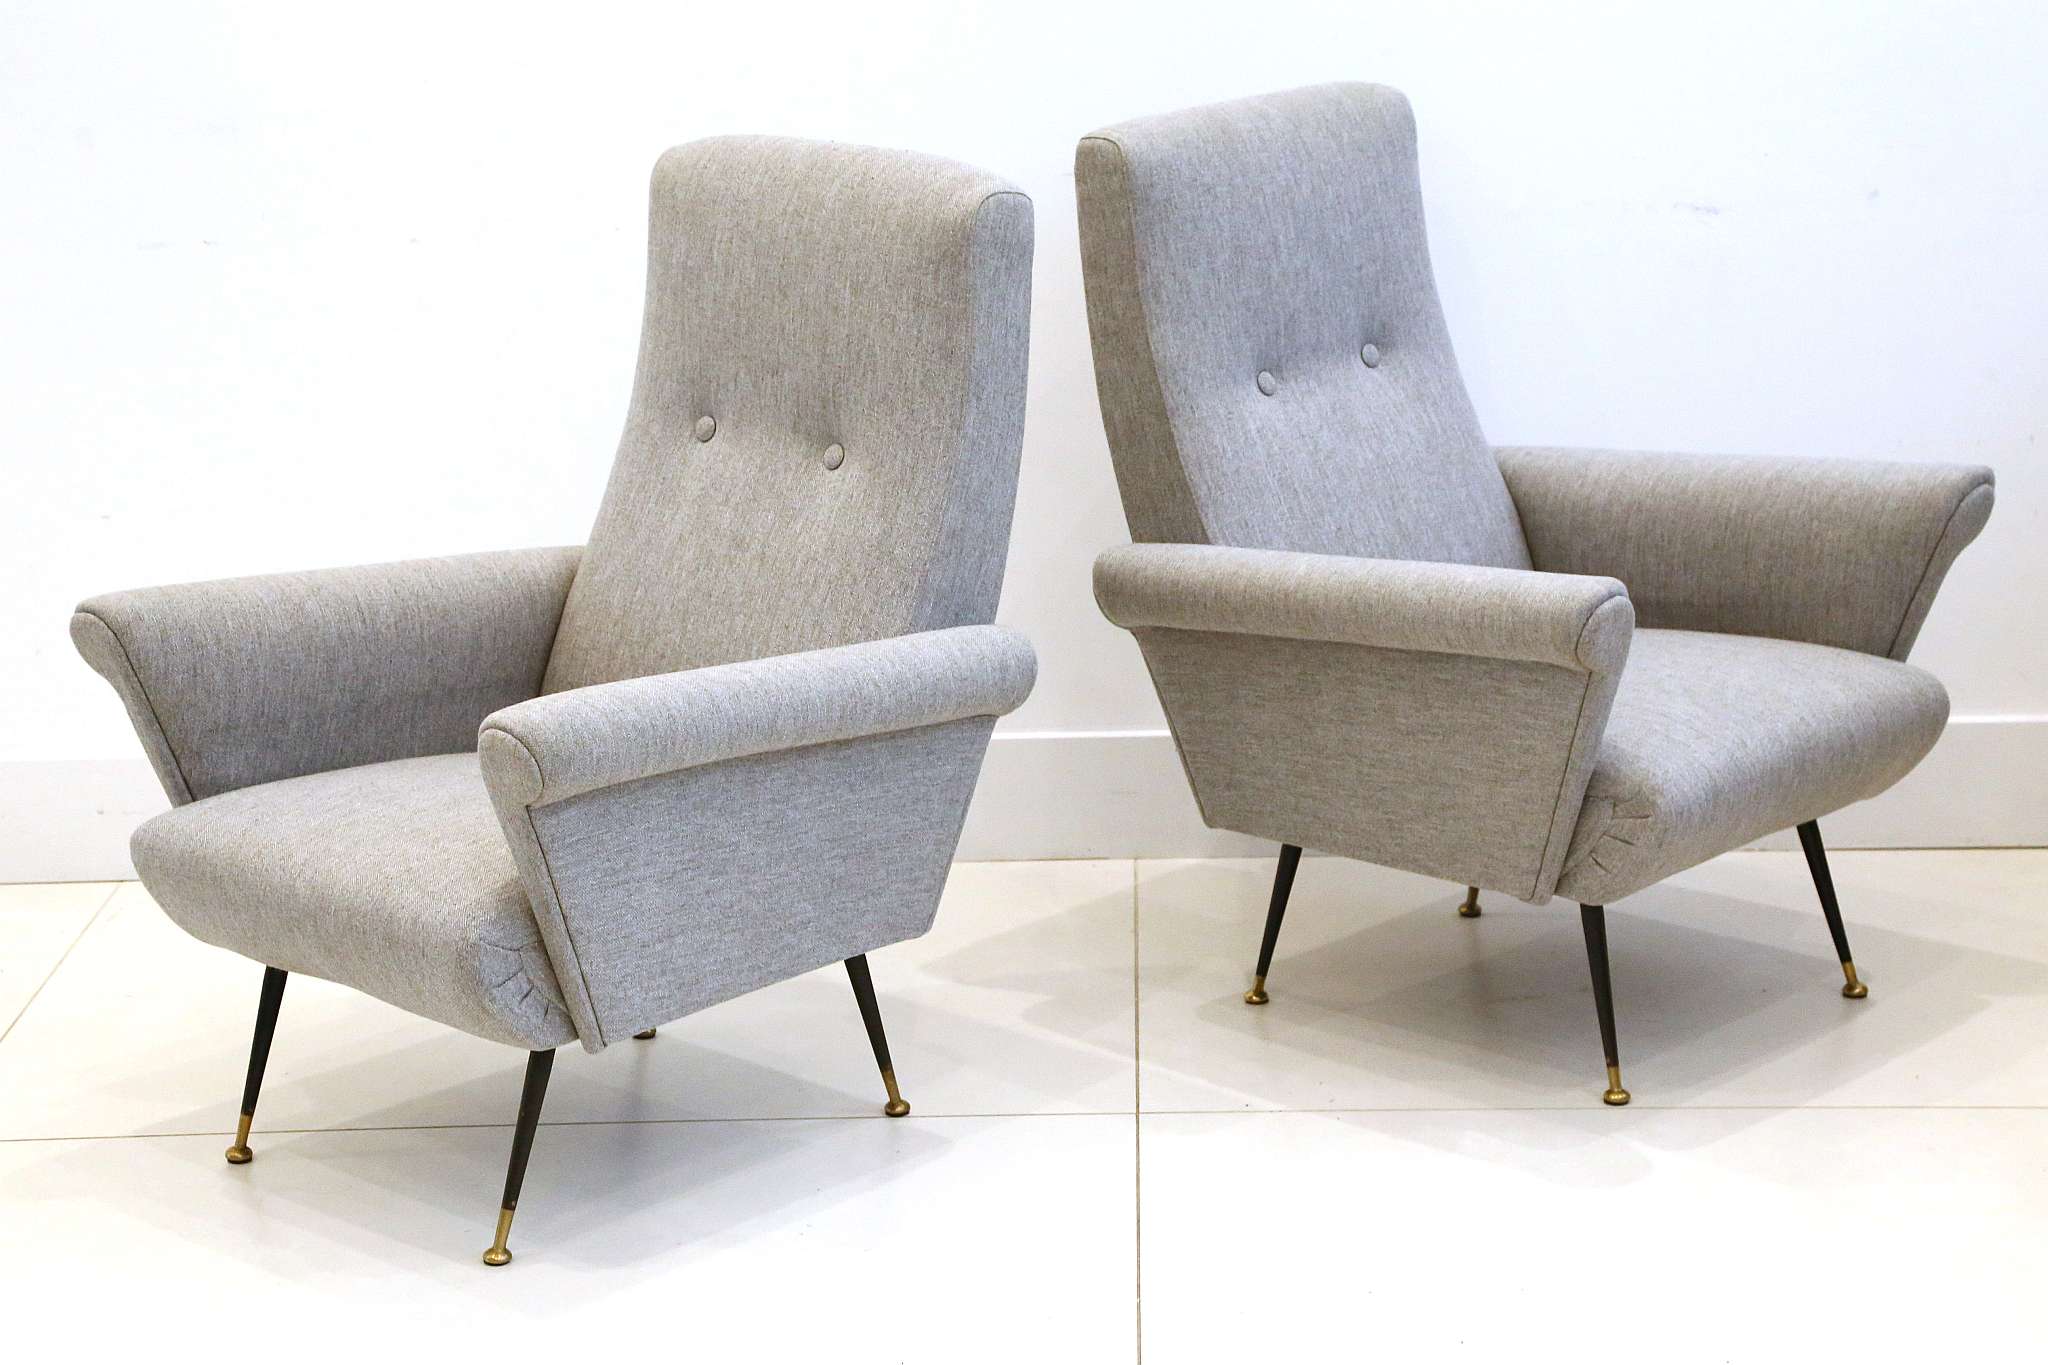 A PAIR OF 1950s ITALIAN ARMCHAIRS, newly upholstered in grey, on black enameled legs, (70cm max wide